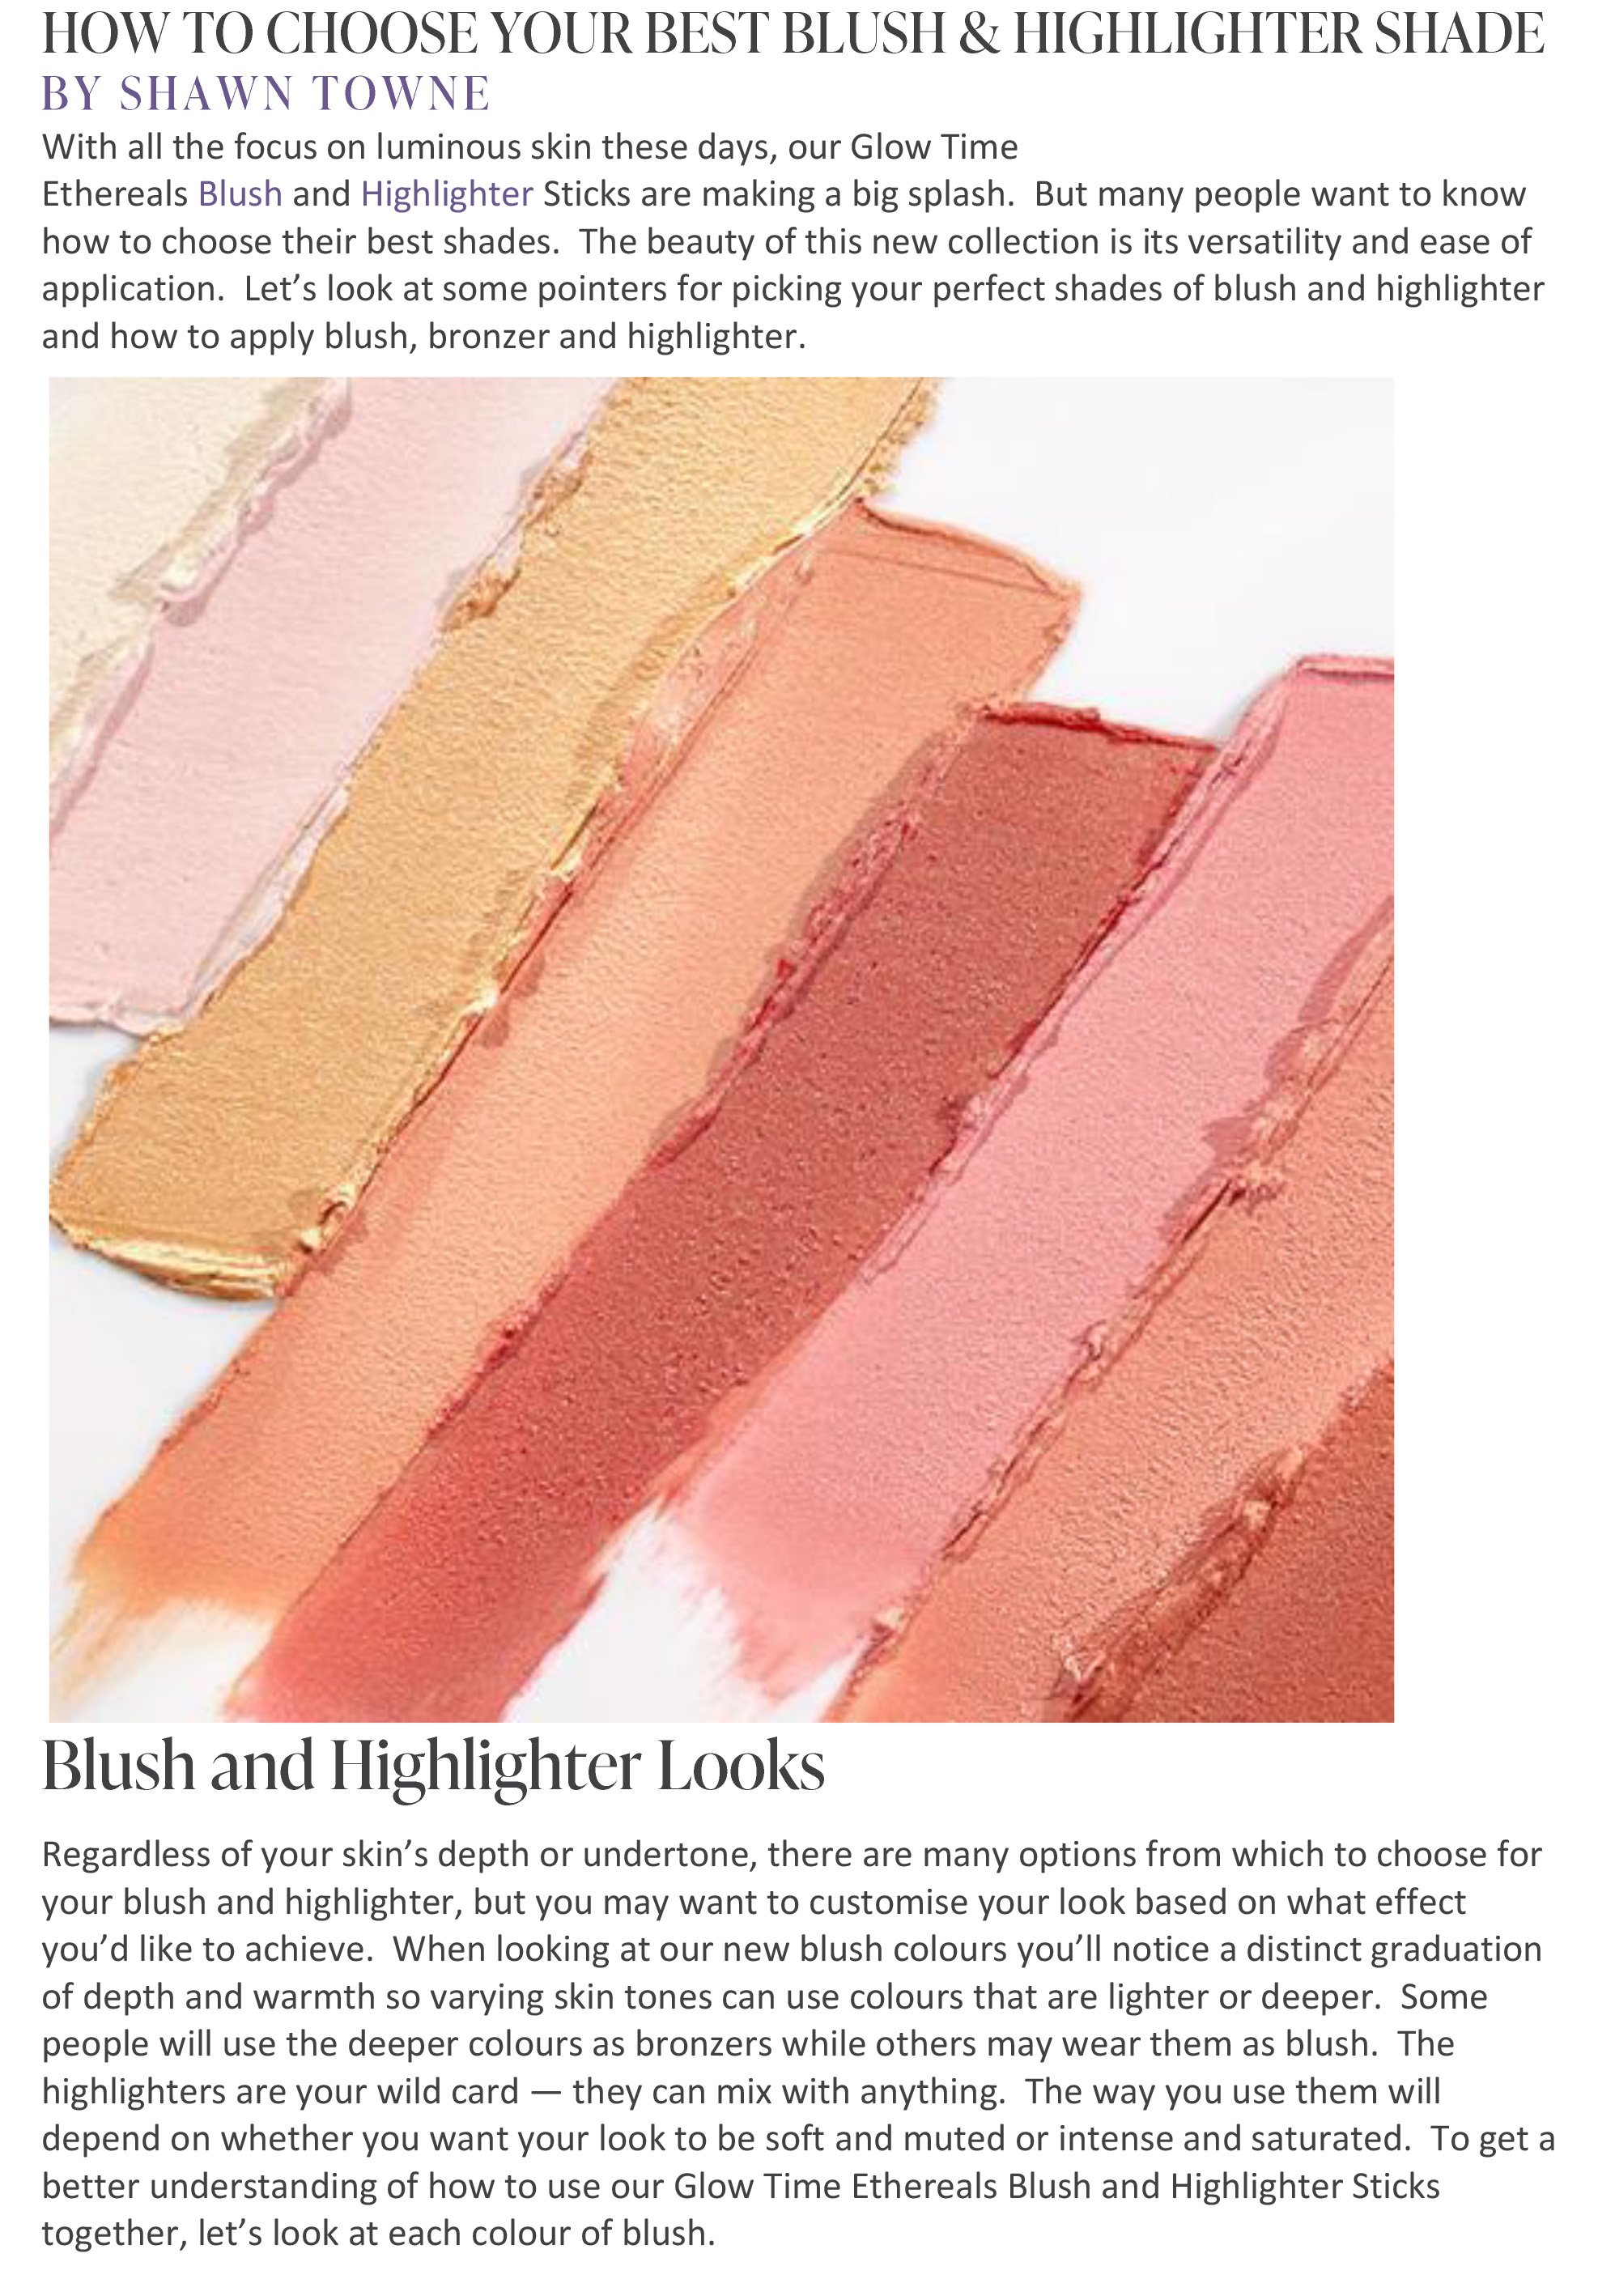 HOW TO CHOOSE YOUR BEST BLUSH3-1.jpg